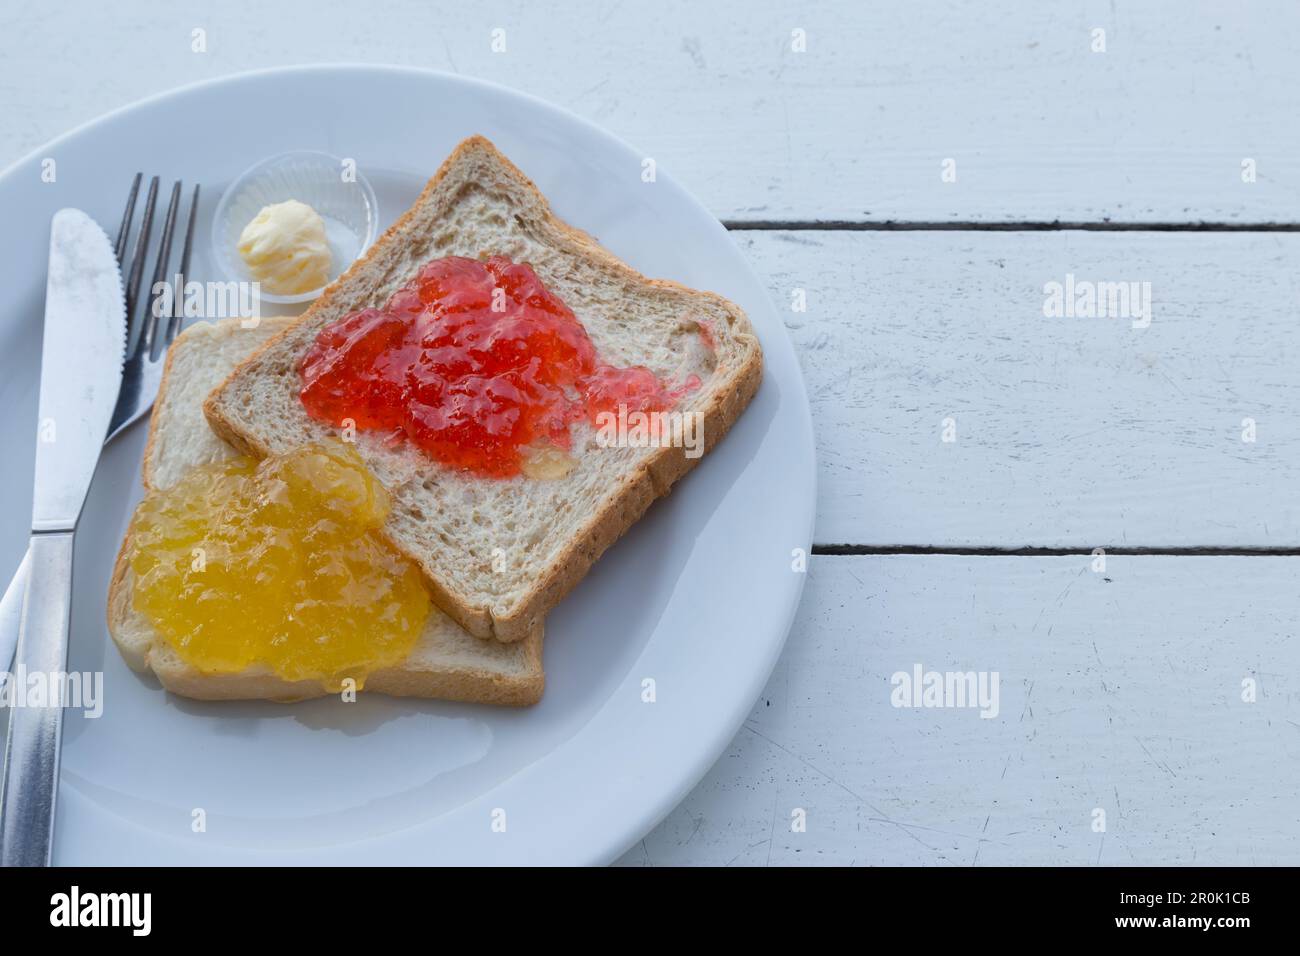 Strawberry and orange jam on the bread with white wood table baclground Stock Photo